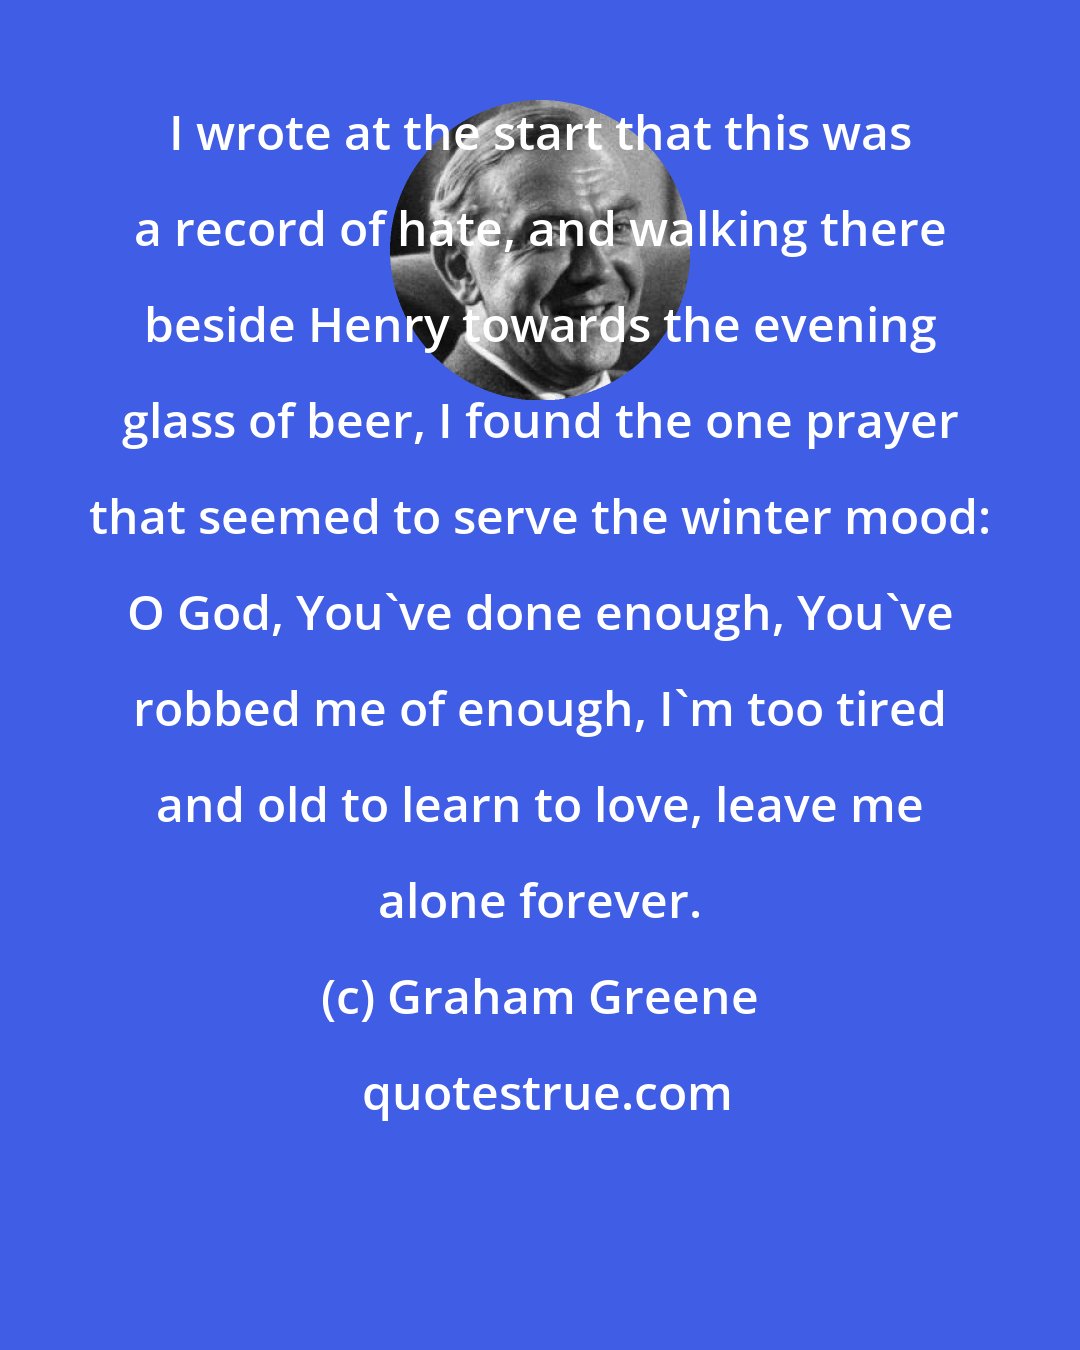 Graham Greene: I wrote at the start that this was a record of hate, and walking there beside Henry towards the evening glass of beer, I found the one prayer that seemed to serve the winter mood: O God, You've done enough, You've robbed me of enough, I'm too tired and old to learn to love, leave me alone forever.